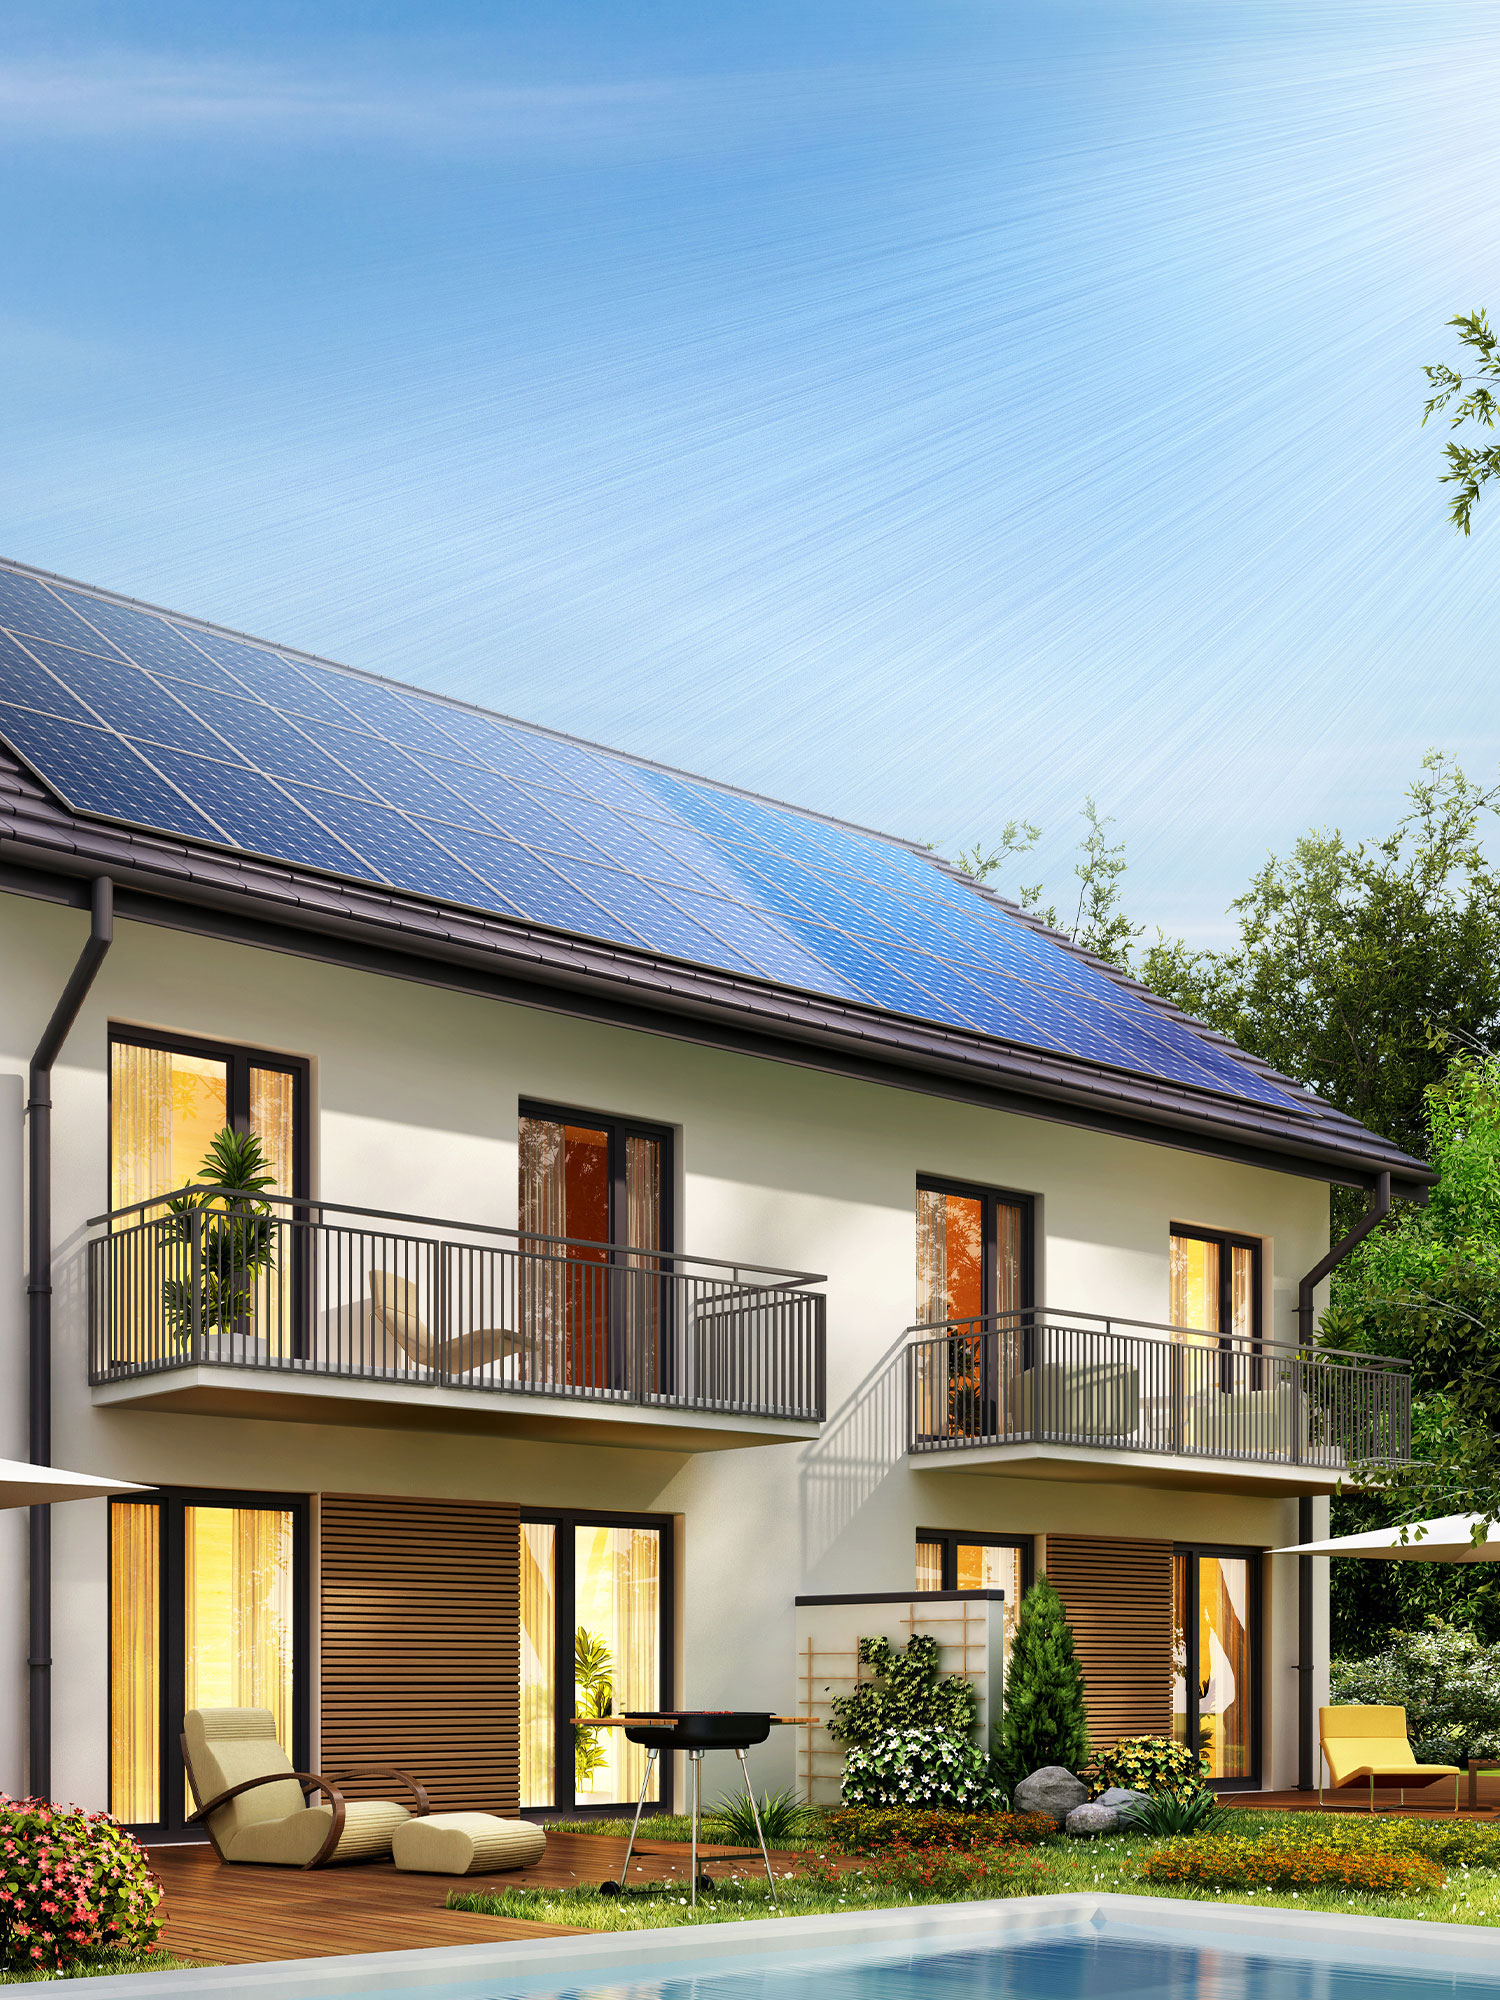 Energy independence for home in Salt Lake City is easy with SunPower by Custom Energy.